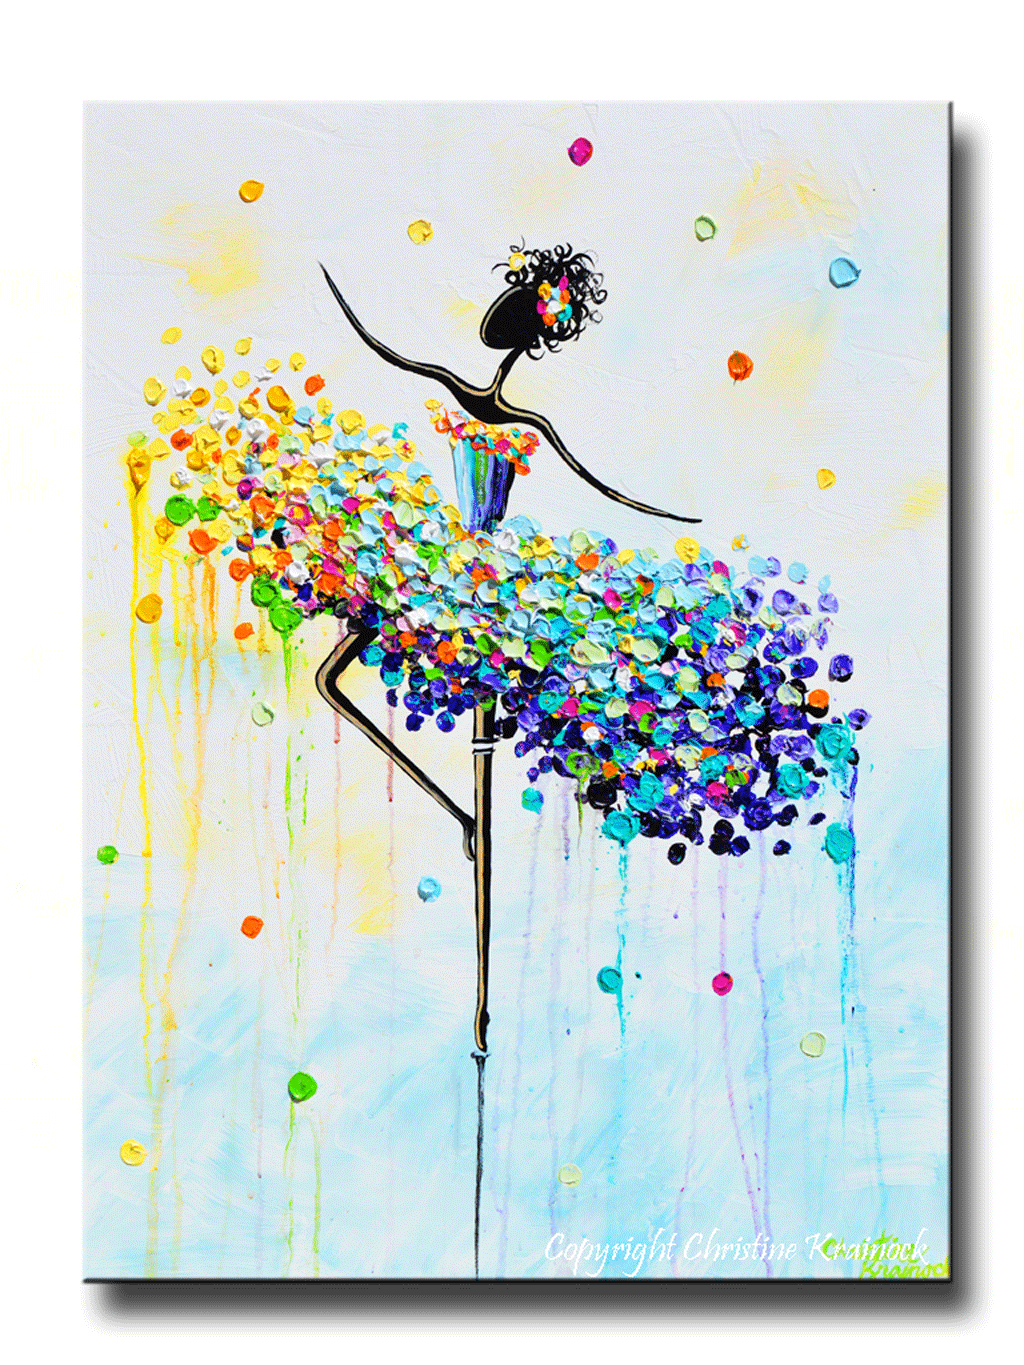 GICLEE PRINT Art Abstract Dancer Painting Colorful CANVAS Prints Dance Wall Decor Sizes to 60" - Christine Krainock Art - Contemporary Art by Christine - 1